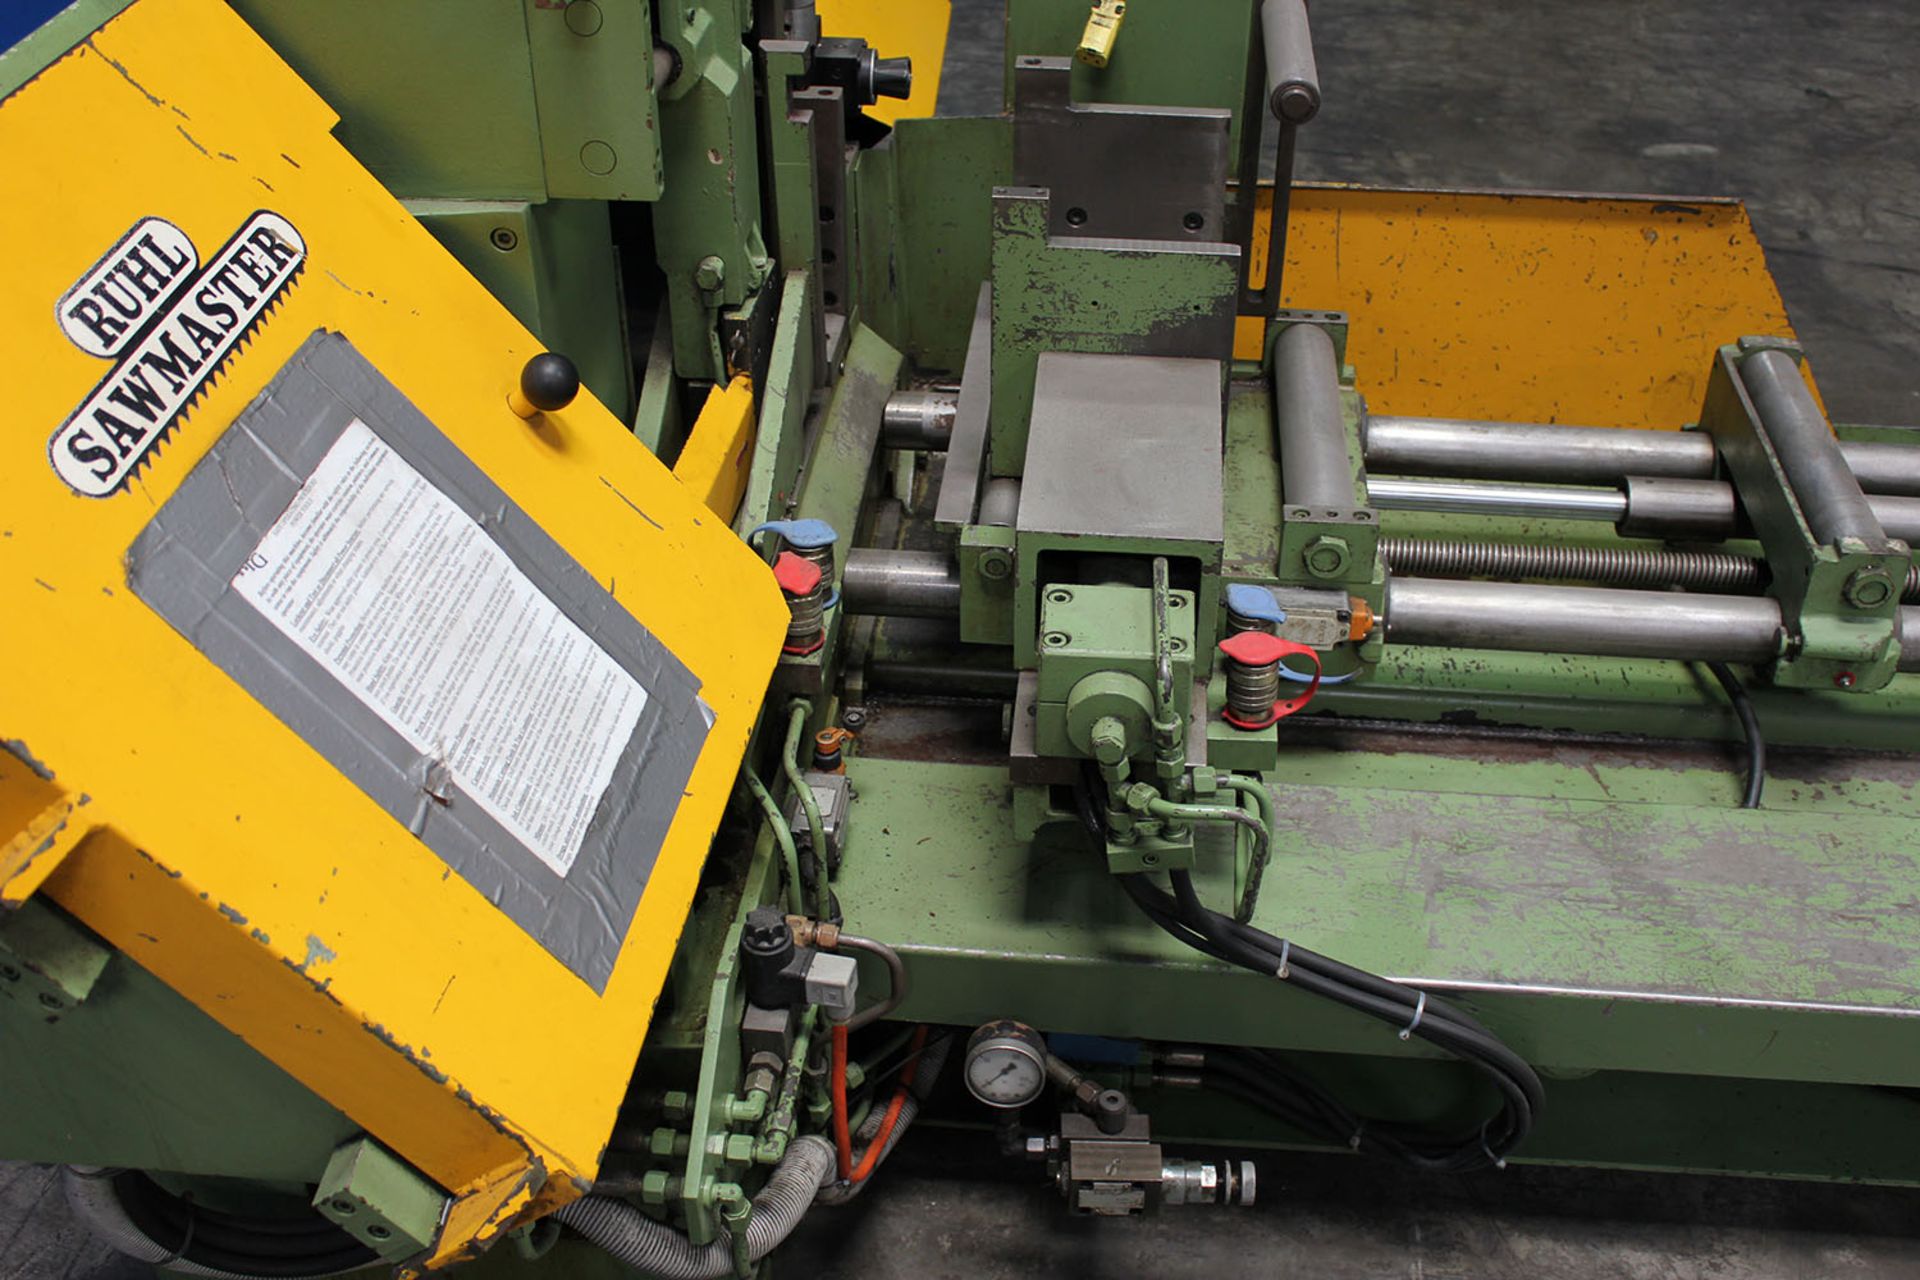 12'' x 10" Behringer Auto. Horiz. Metal Cutting Band Saw - Located In: Huntington Park, CA - Image 6 of 7